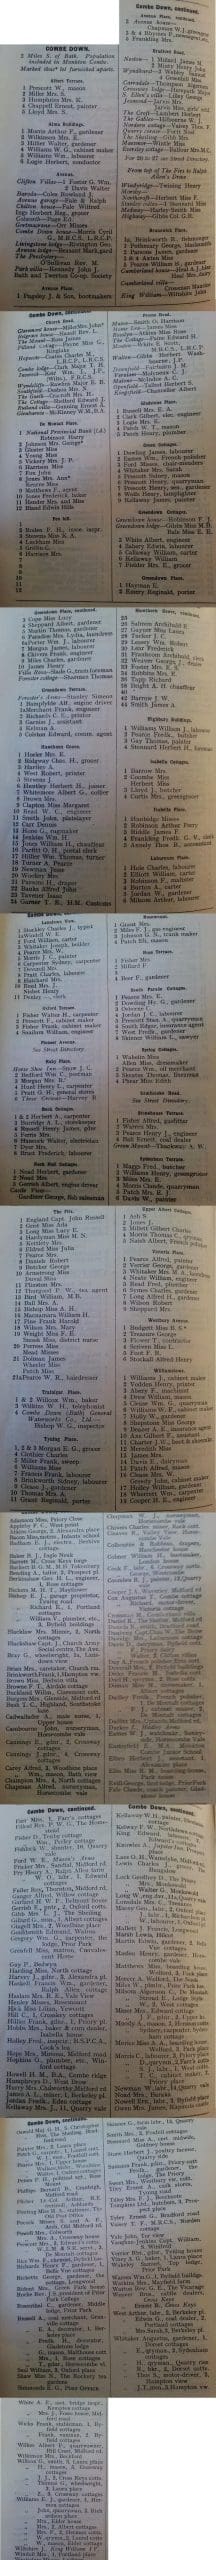 1927 Post Office Directory for Combe Down